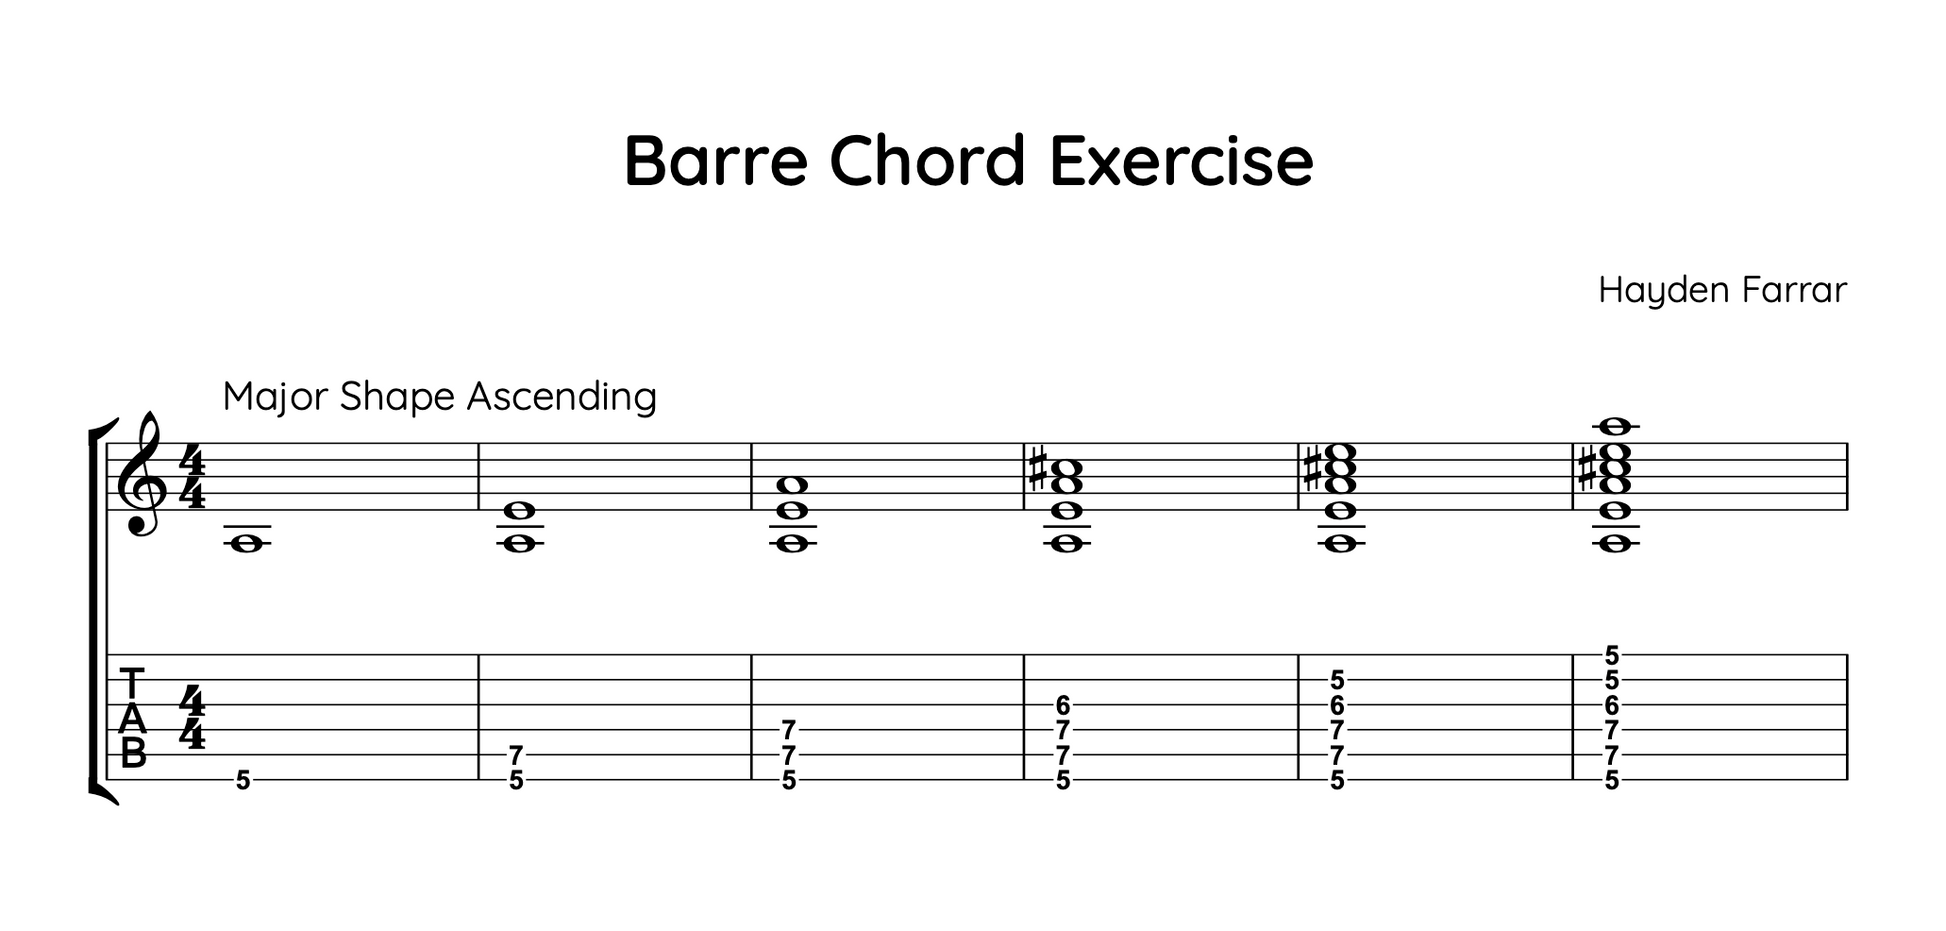 5 Basic Guitar Chords - An Over the Shoulder Look